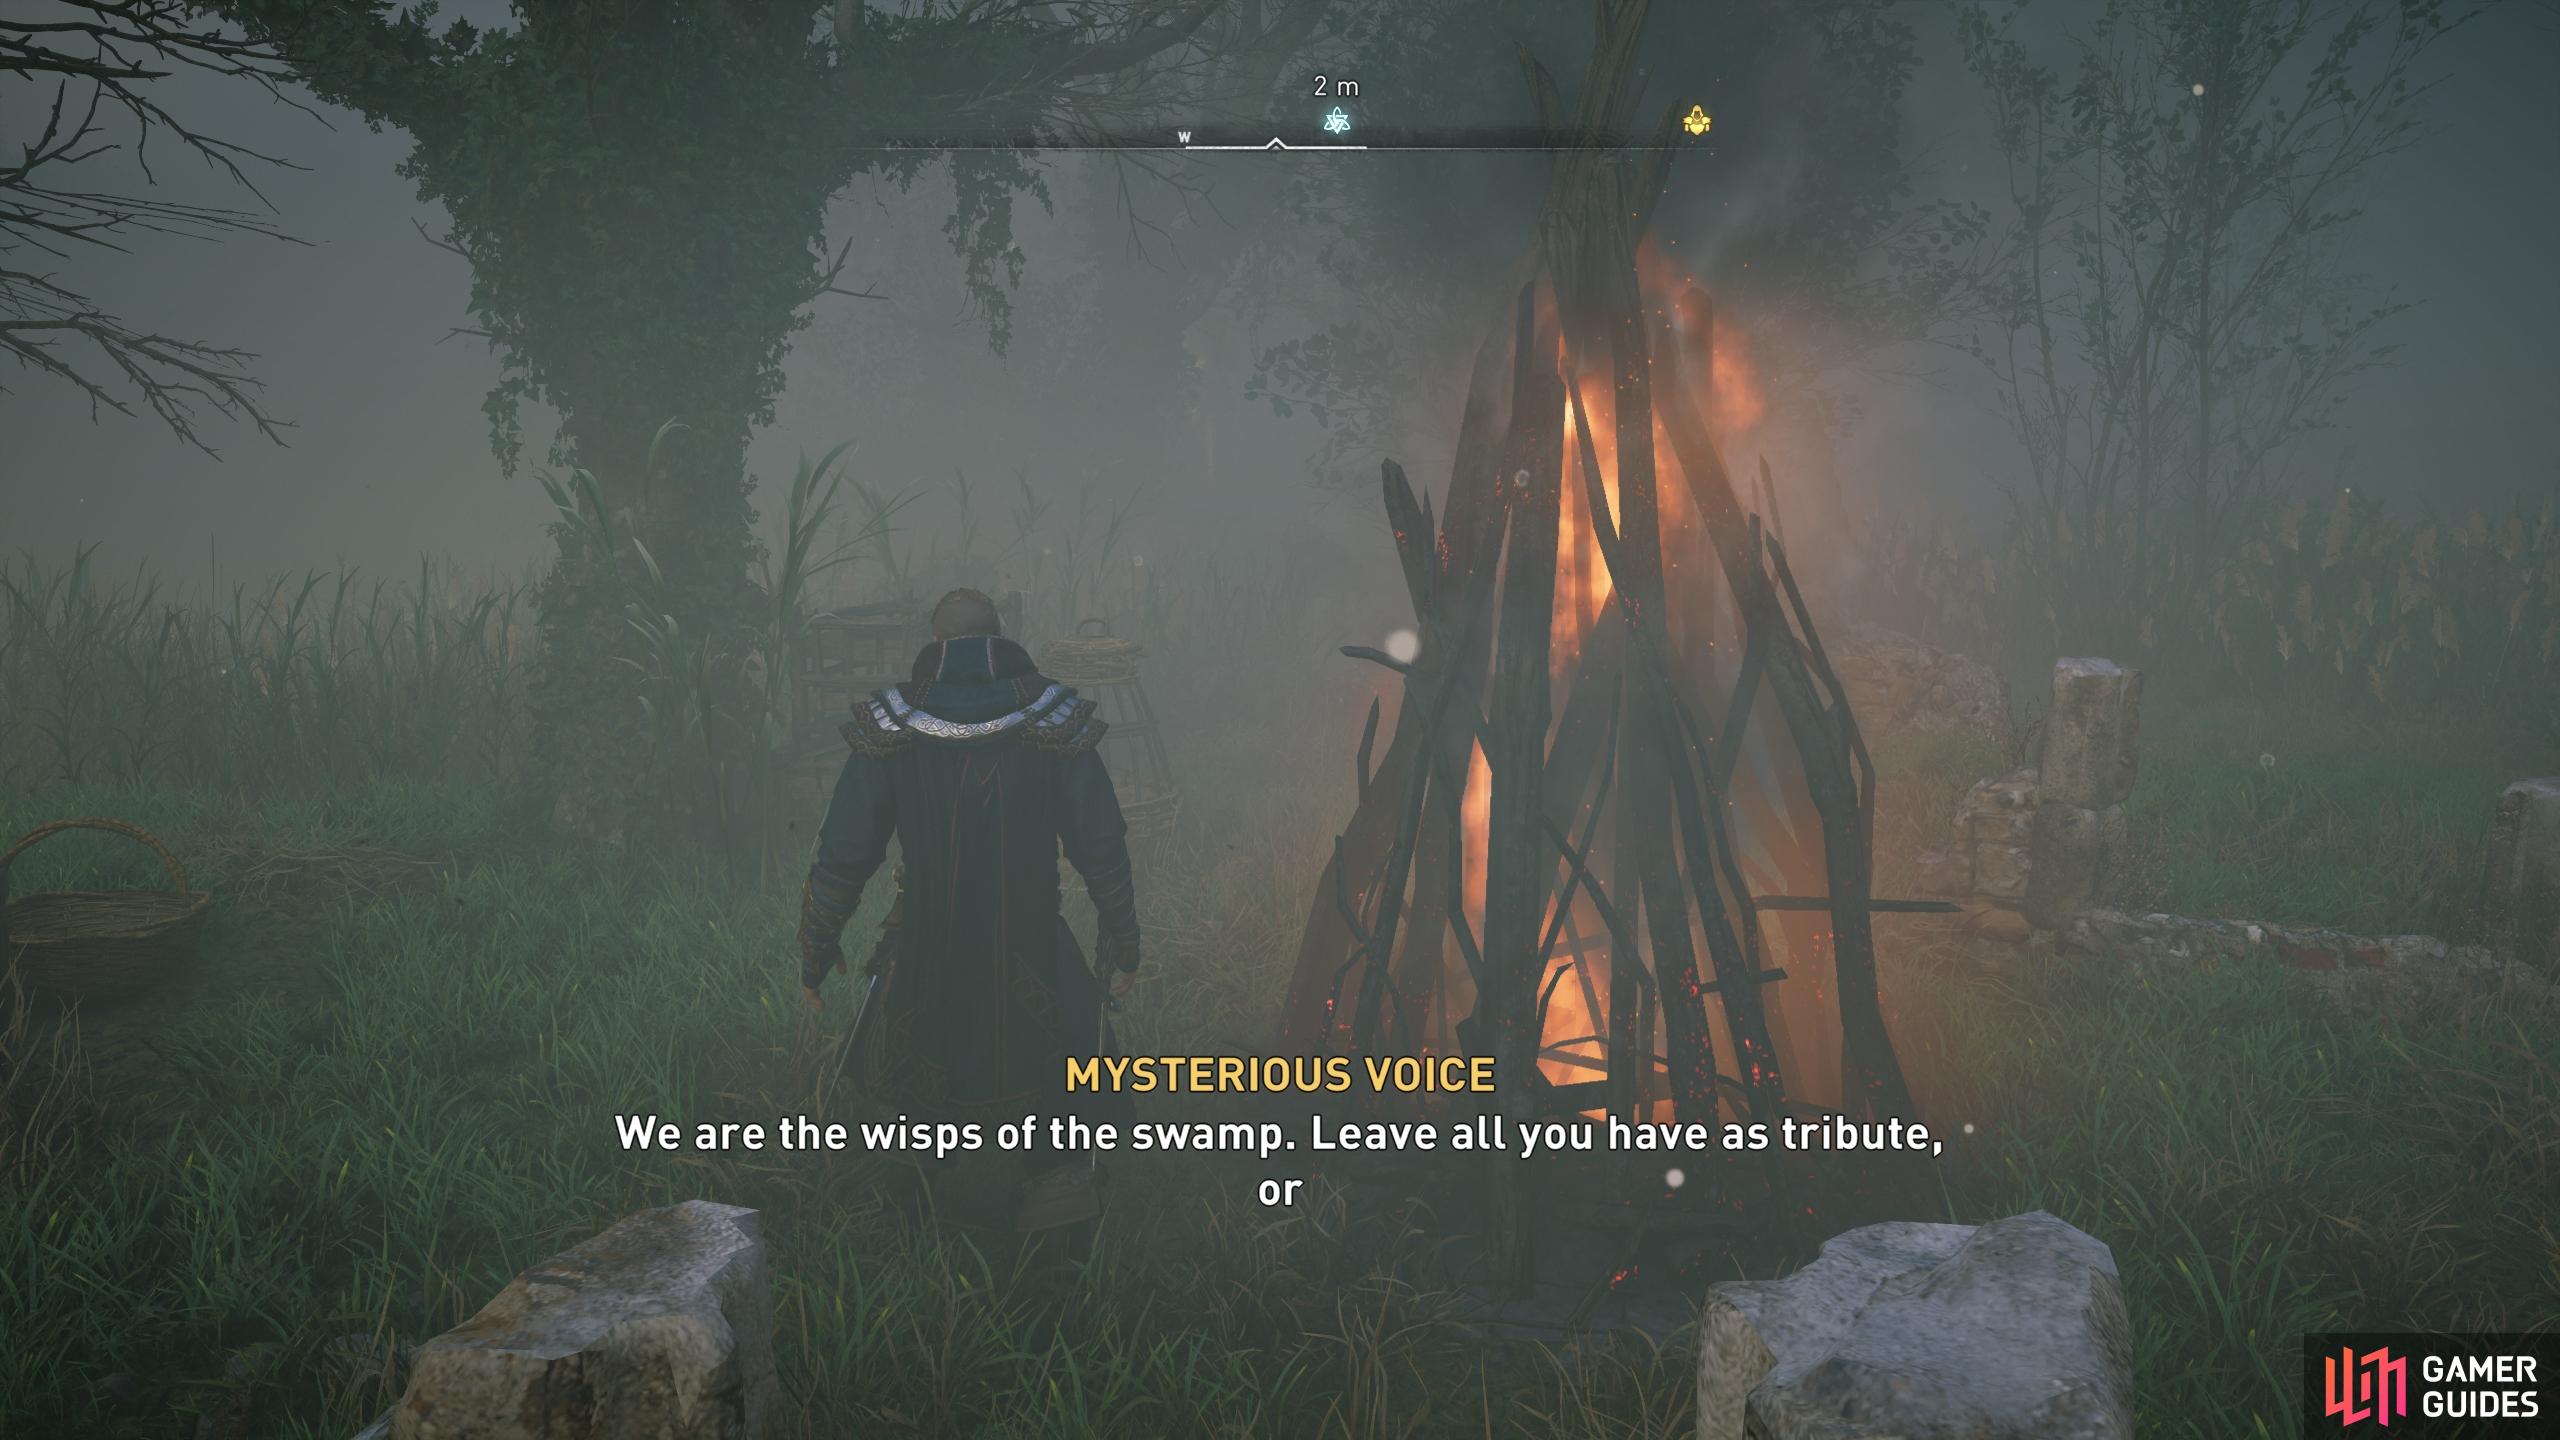 When you arrive at the mystery location, you'll hear voices from the mist.